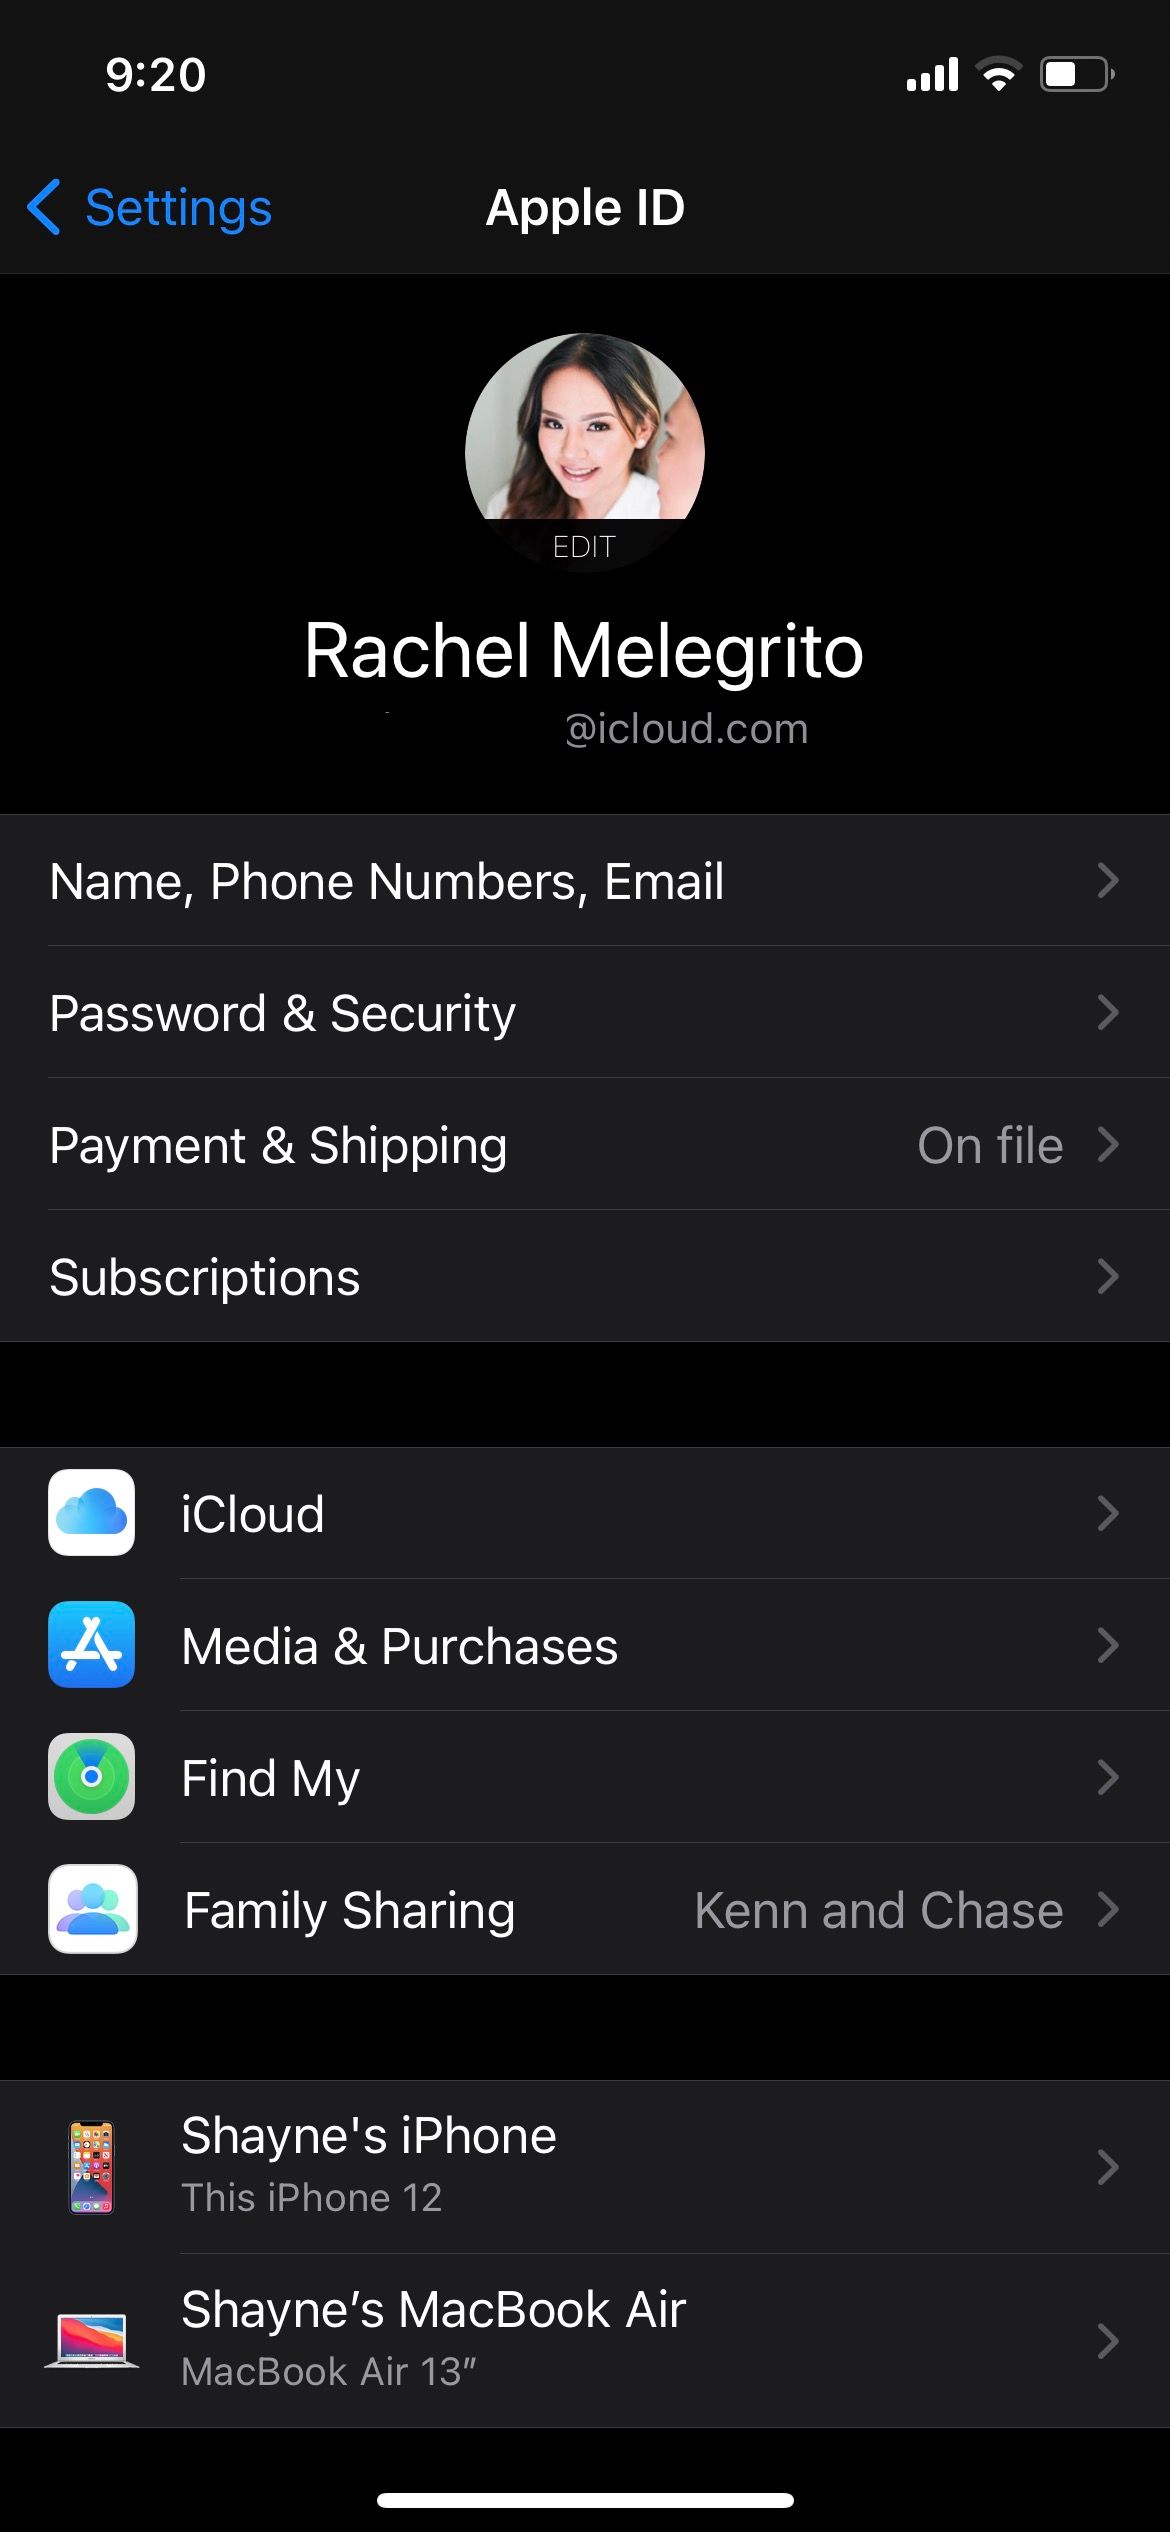 iPhone settings showing payment and shipping